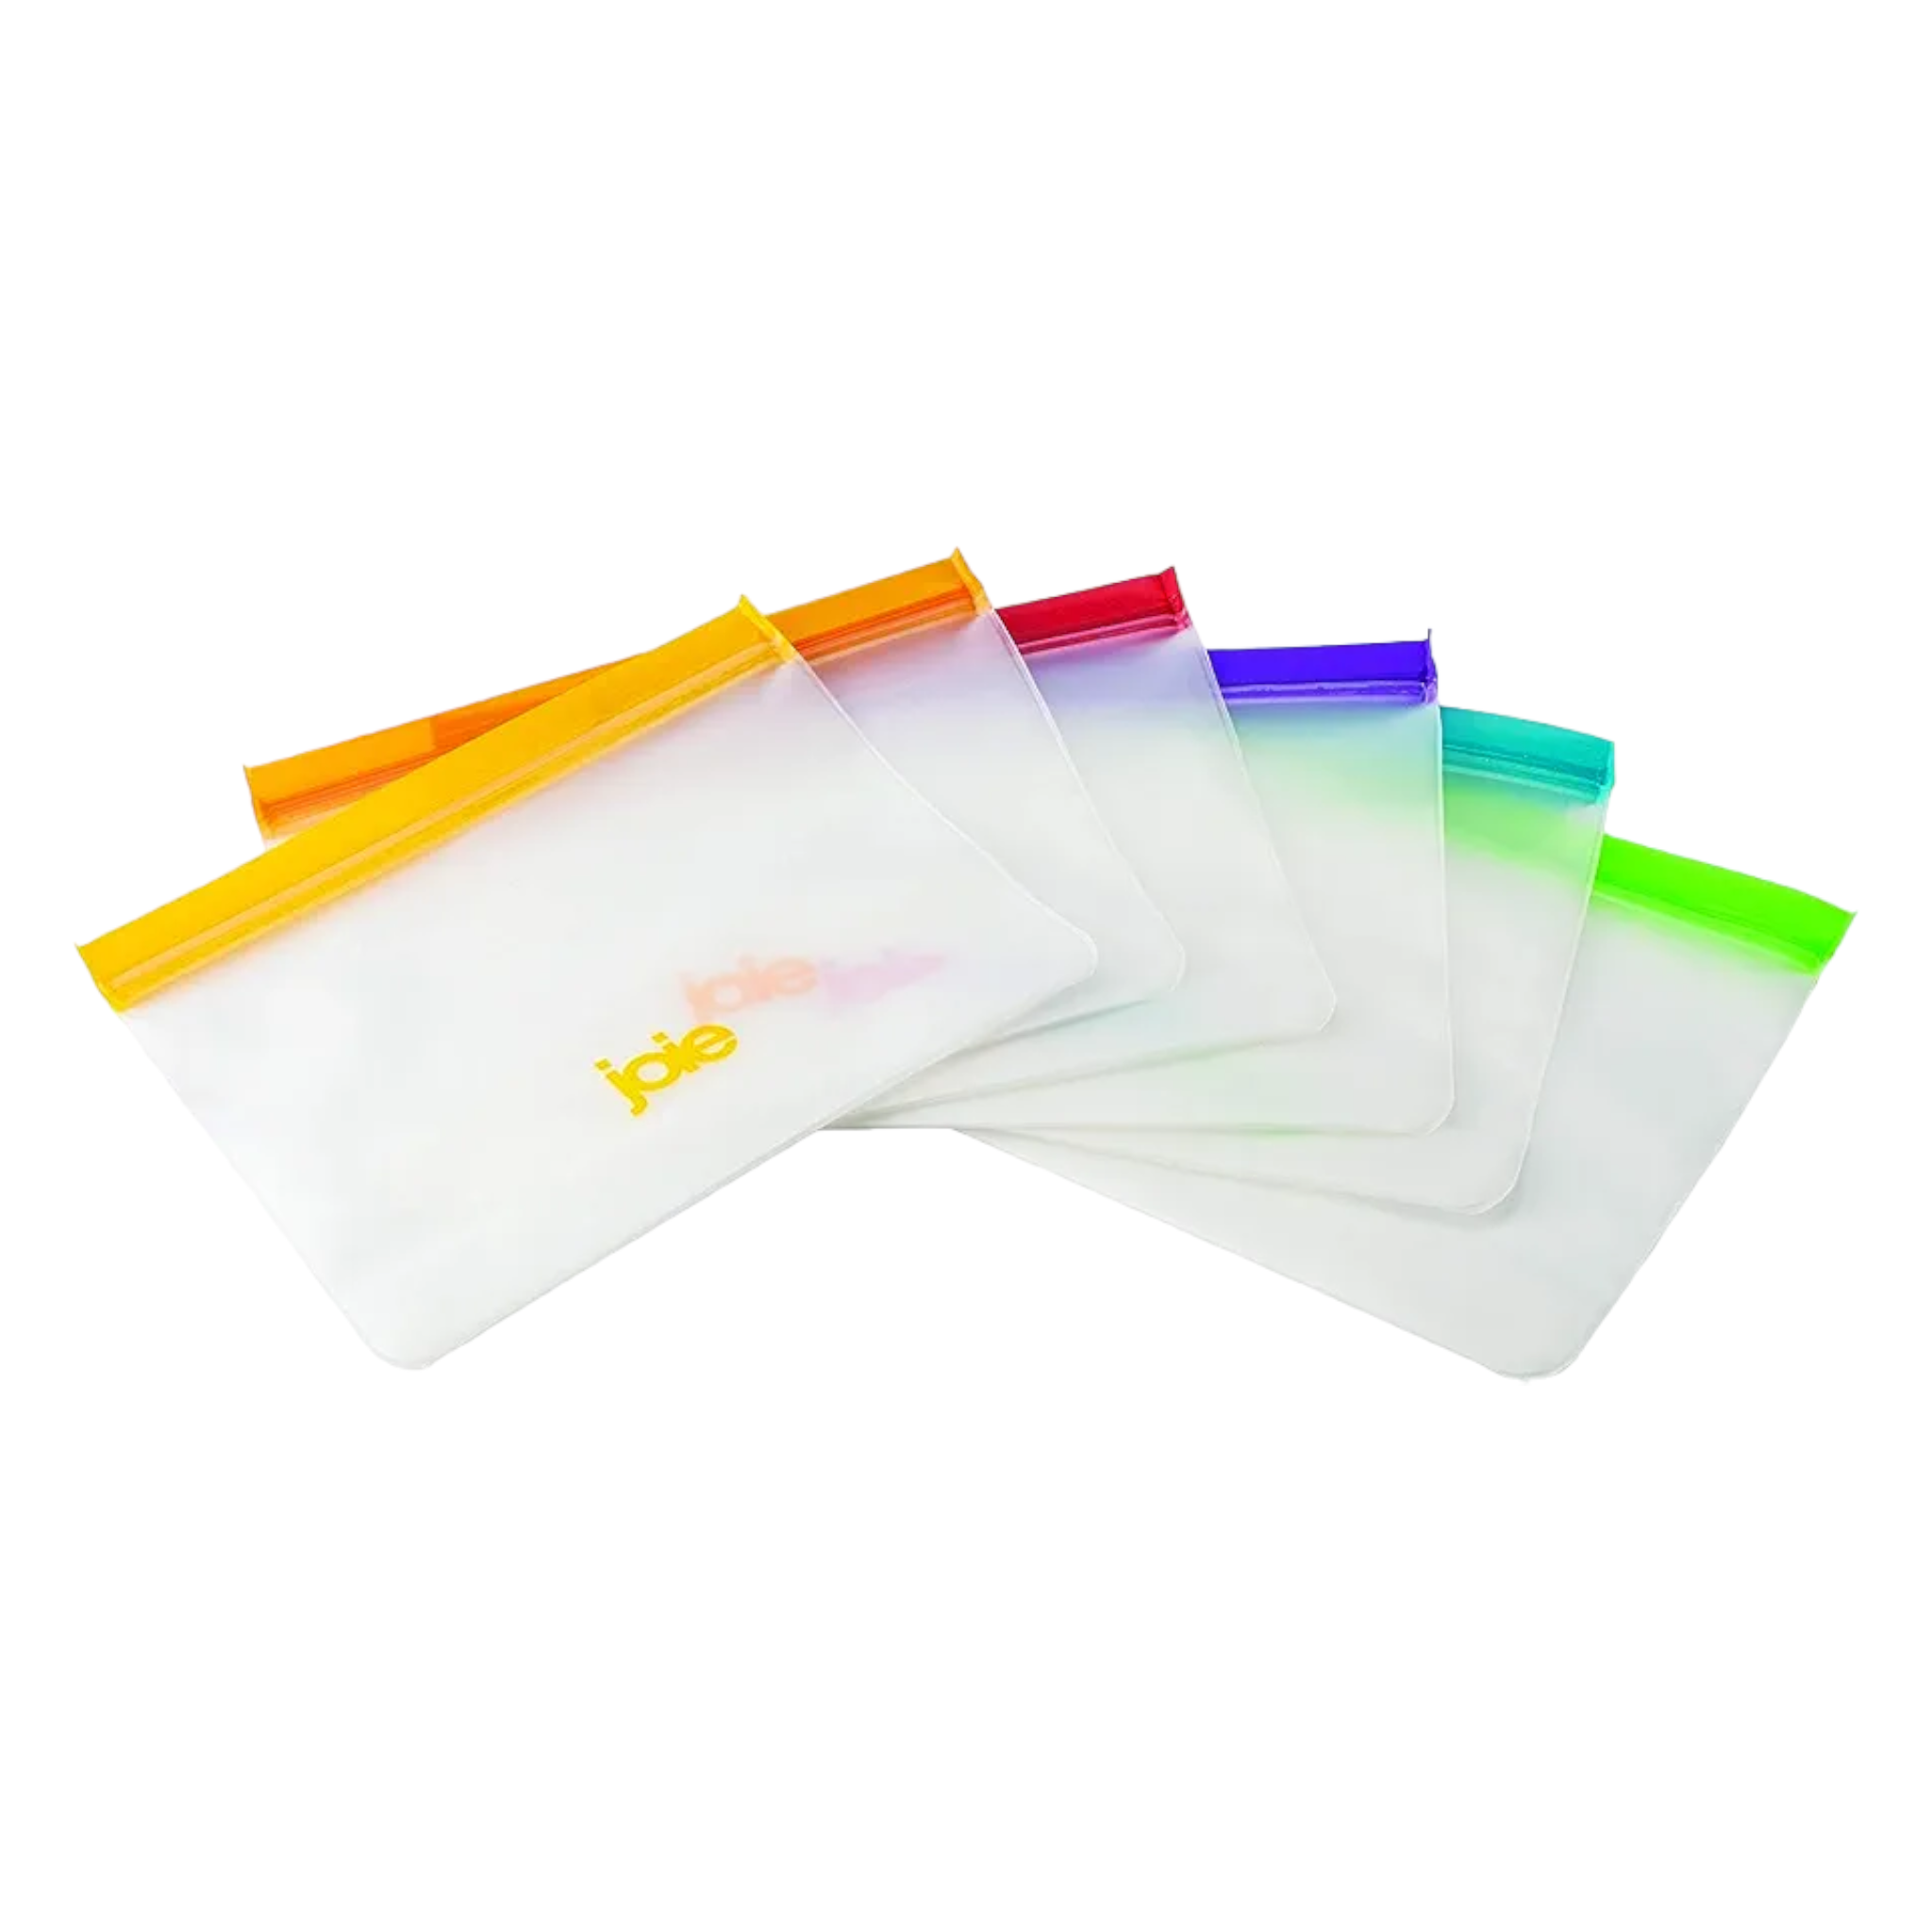 Joie Silicone Feezer Bag Reusable Snack Bag with Double Seal Closure 10pc Set 15281